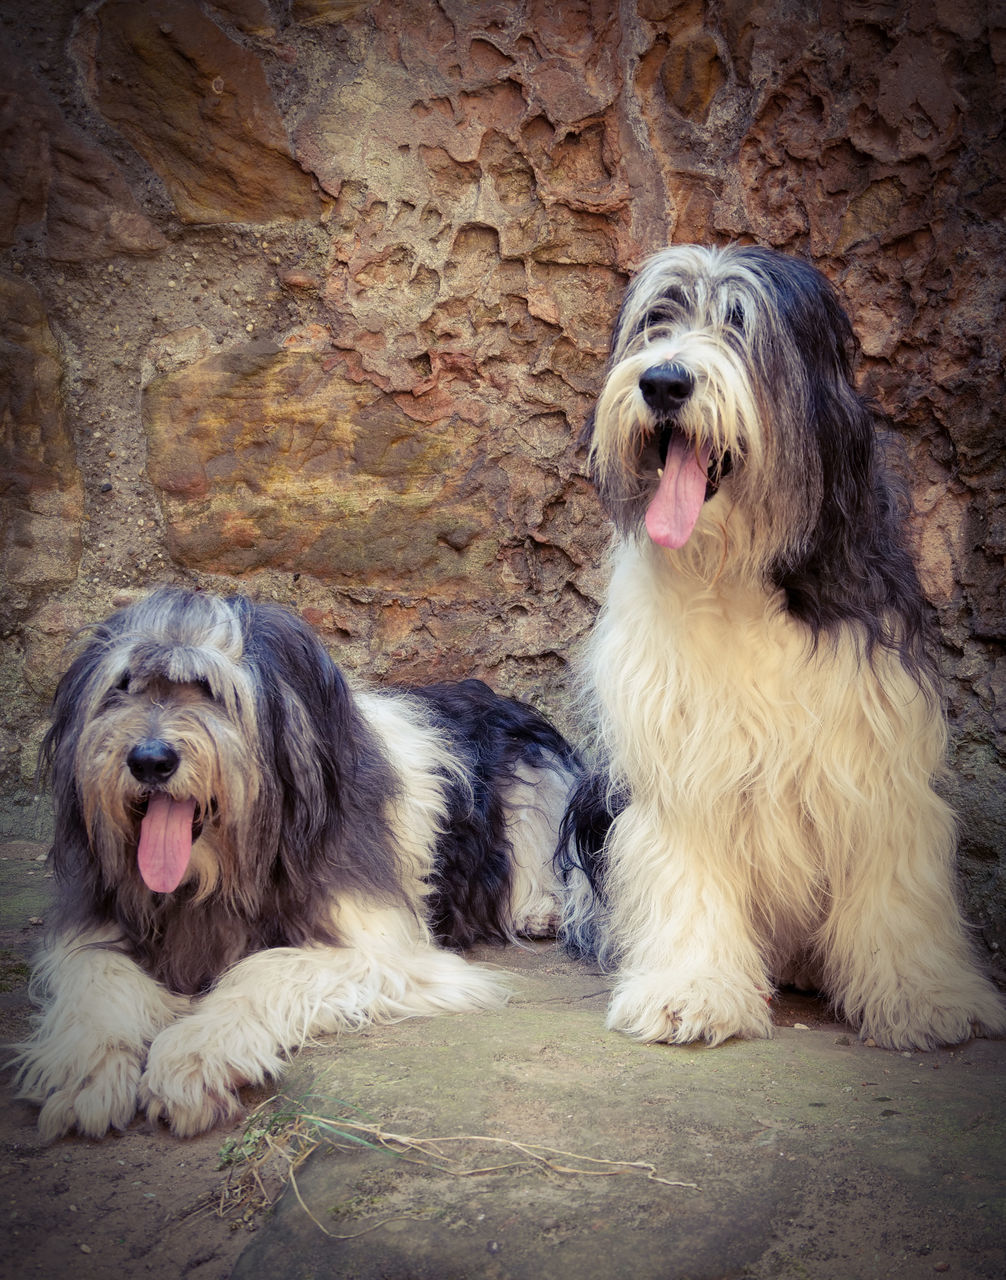 dog, animal themes, animal, pet, mammal, domestic animals, canine, havanese, one animal, bearded collie, löwchen, polish lowland sheepdog, catalan sheepdog, mouth open, animal hair, sticking out tongue, facial expression, no people, sitting, portrait, cão da serra de aires, animal body part, cockapoo, day, relaxation